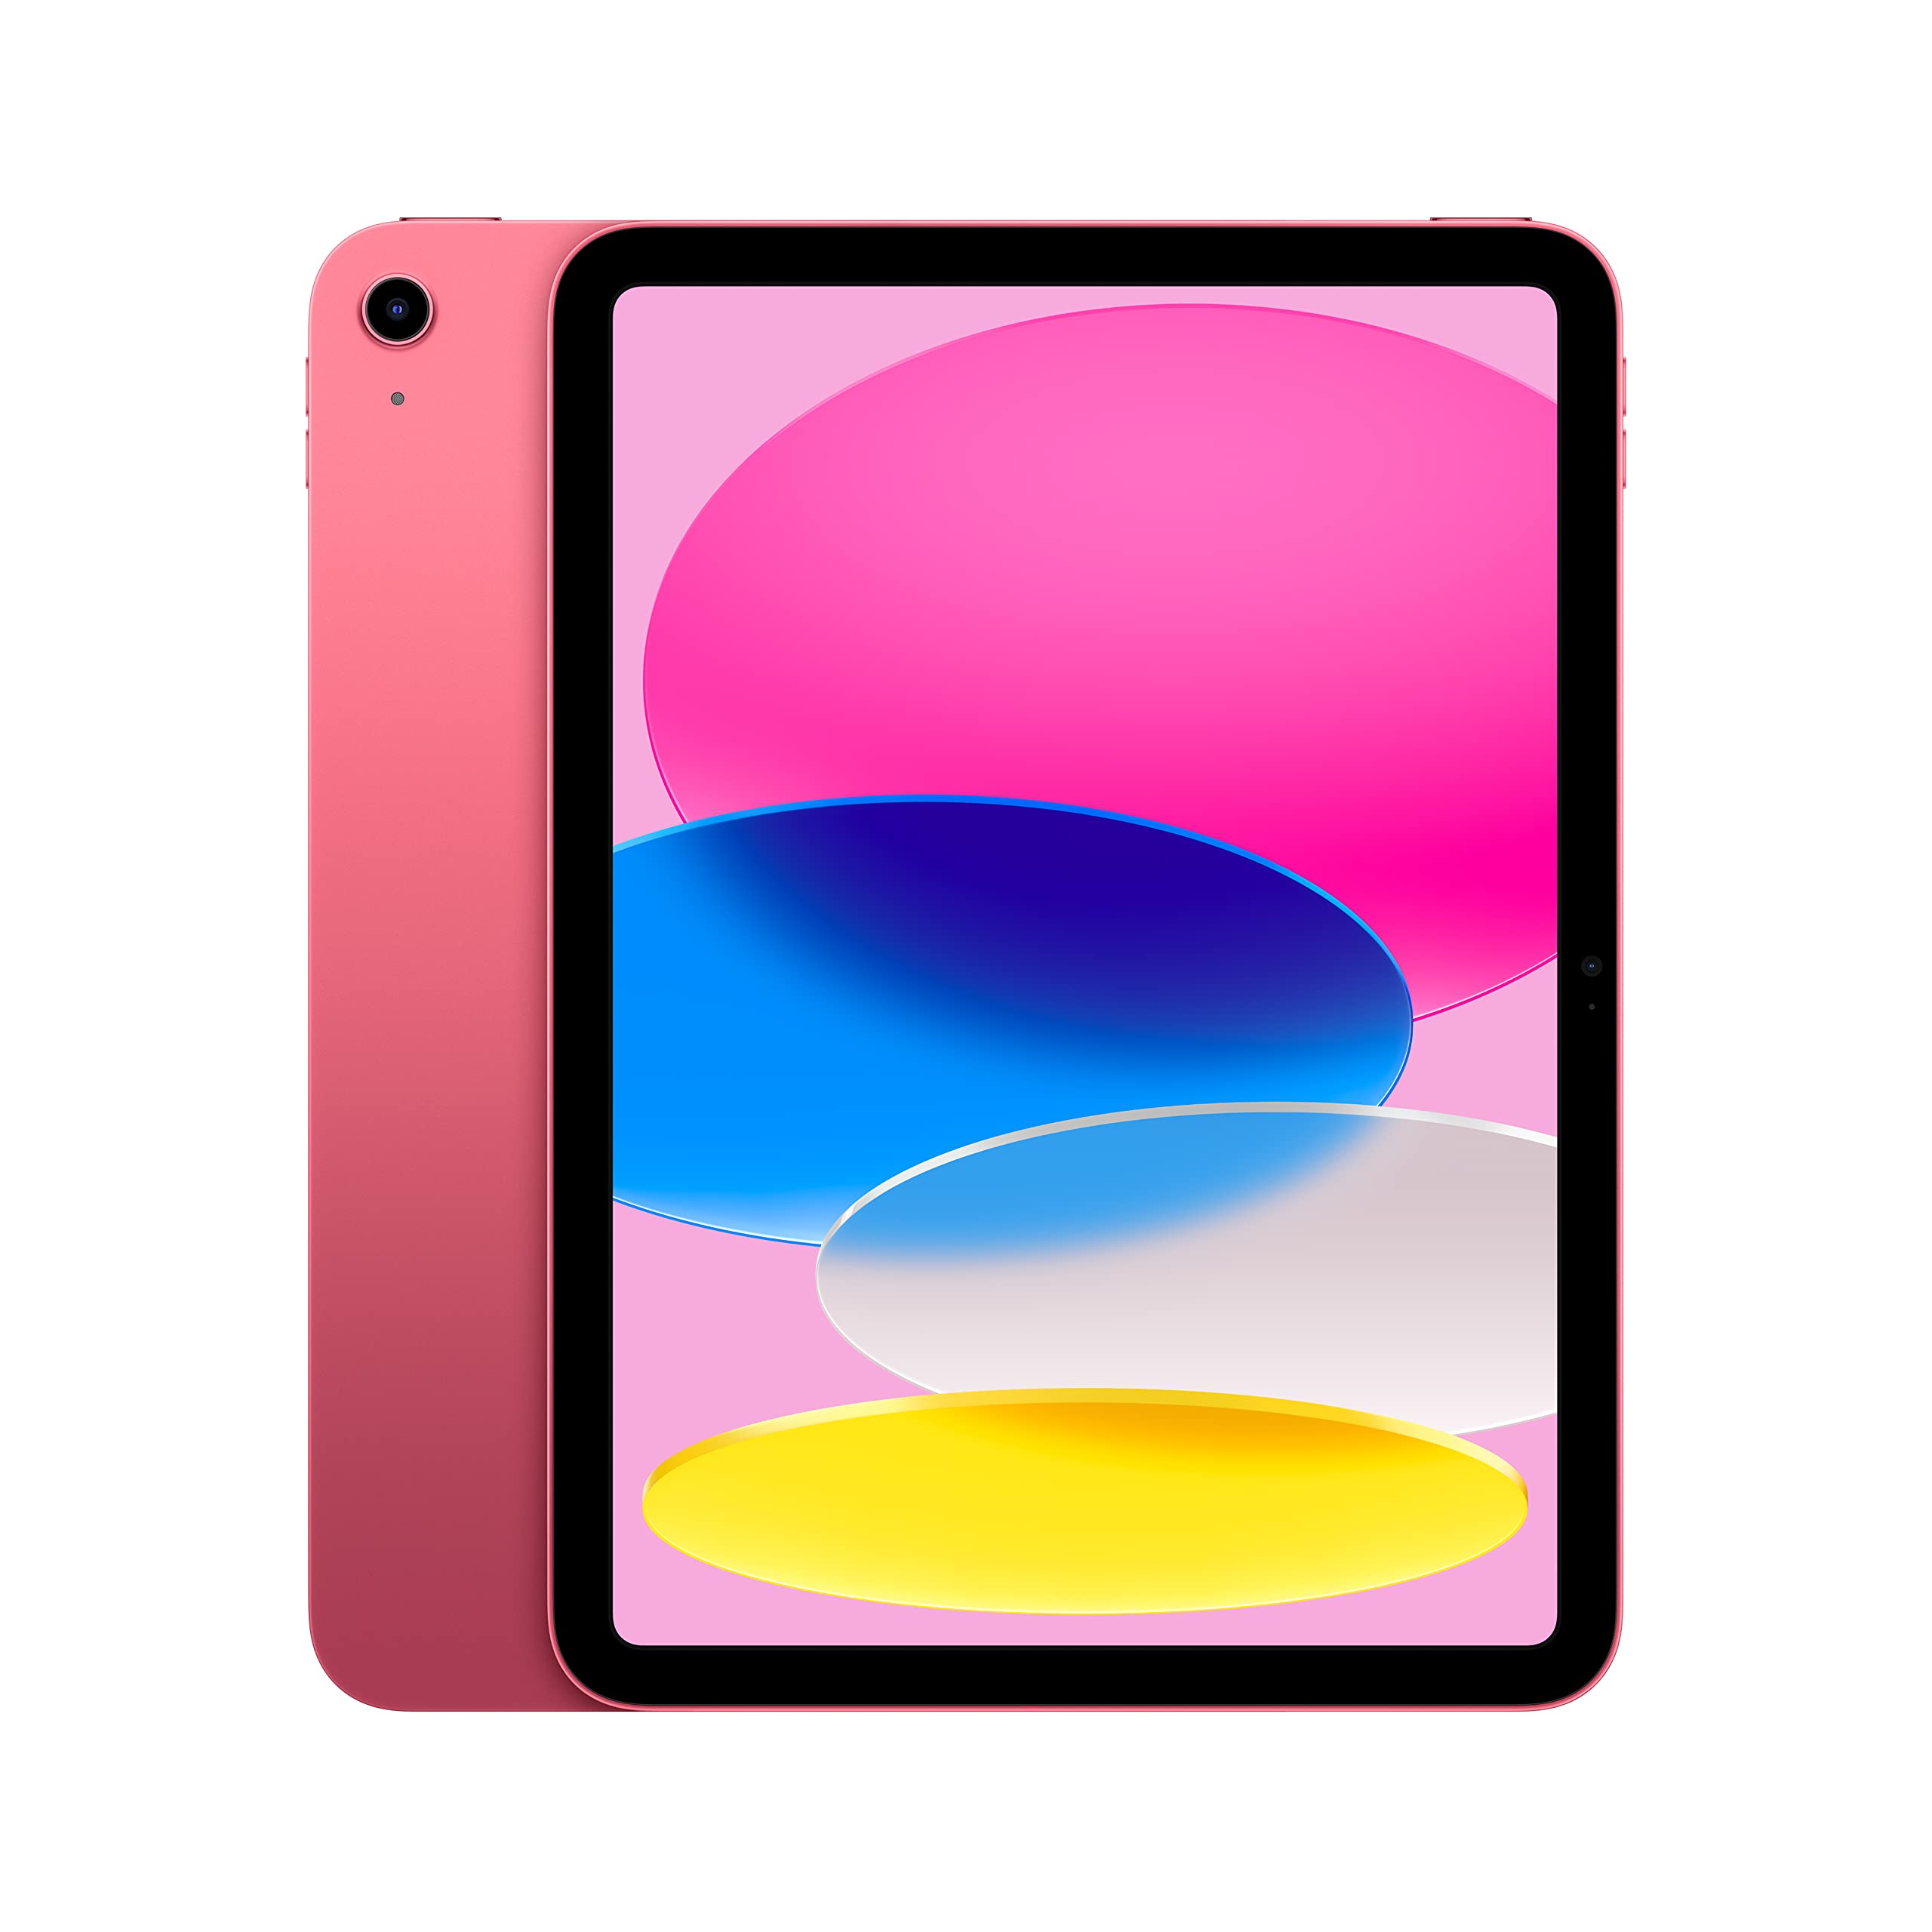 Apple iPad (10th Generation): with A14 Bionic chip, 10.9-inch Liquid Retina Display, 256GB, Wi-Fi 6, 12MP front/12MP Back Camera, Touch ID, All-Day Battery Life – Pink